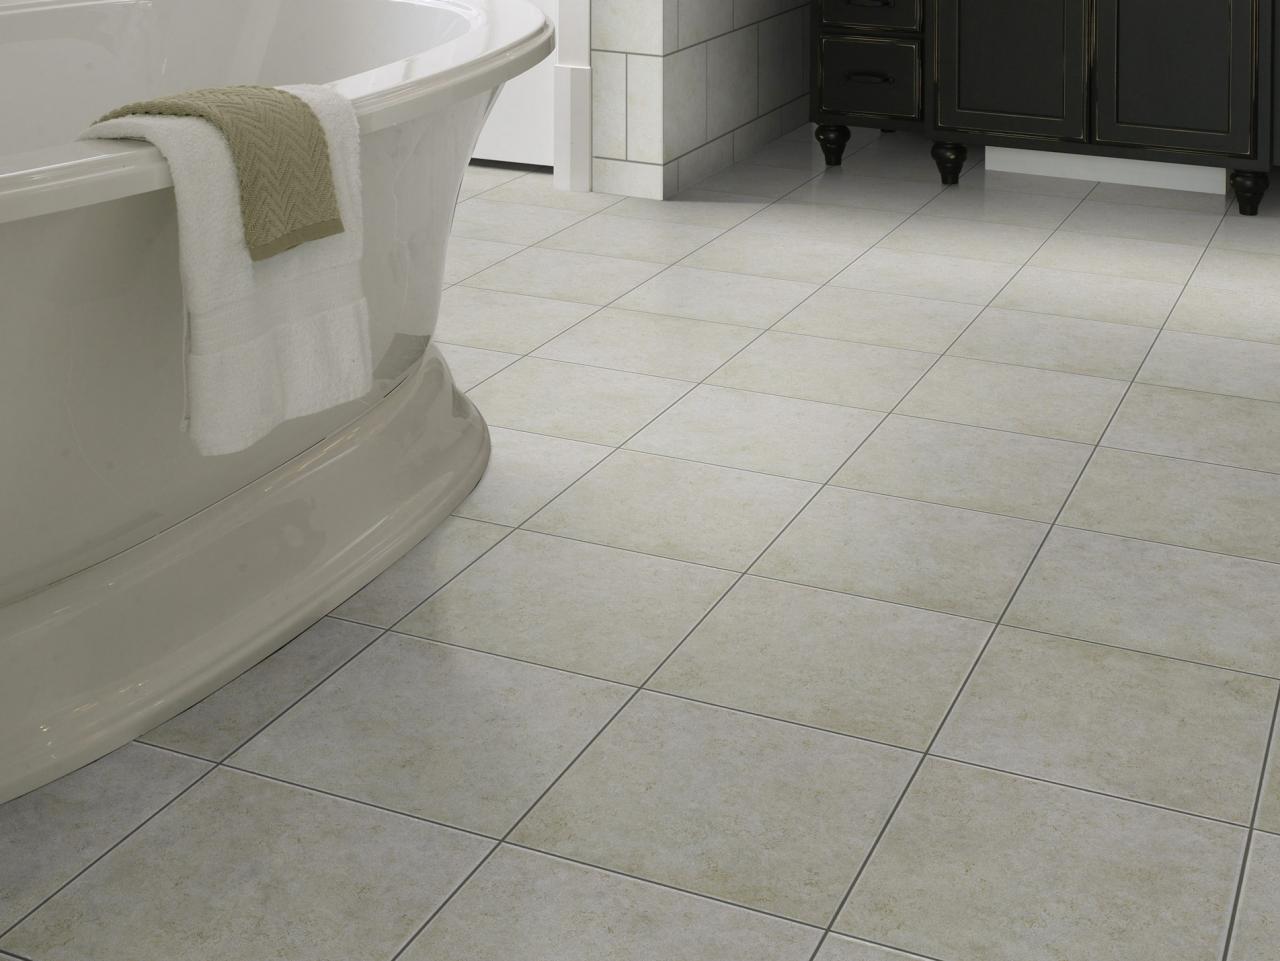 Why Homeowners Love Ceramic Tile, Ceramic Tile Cost Per Square Foot Installed